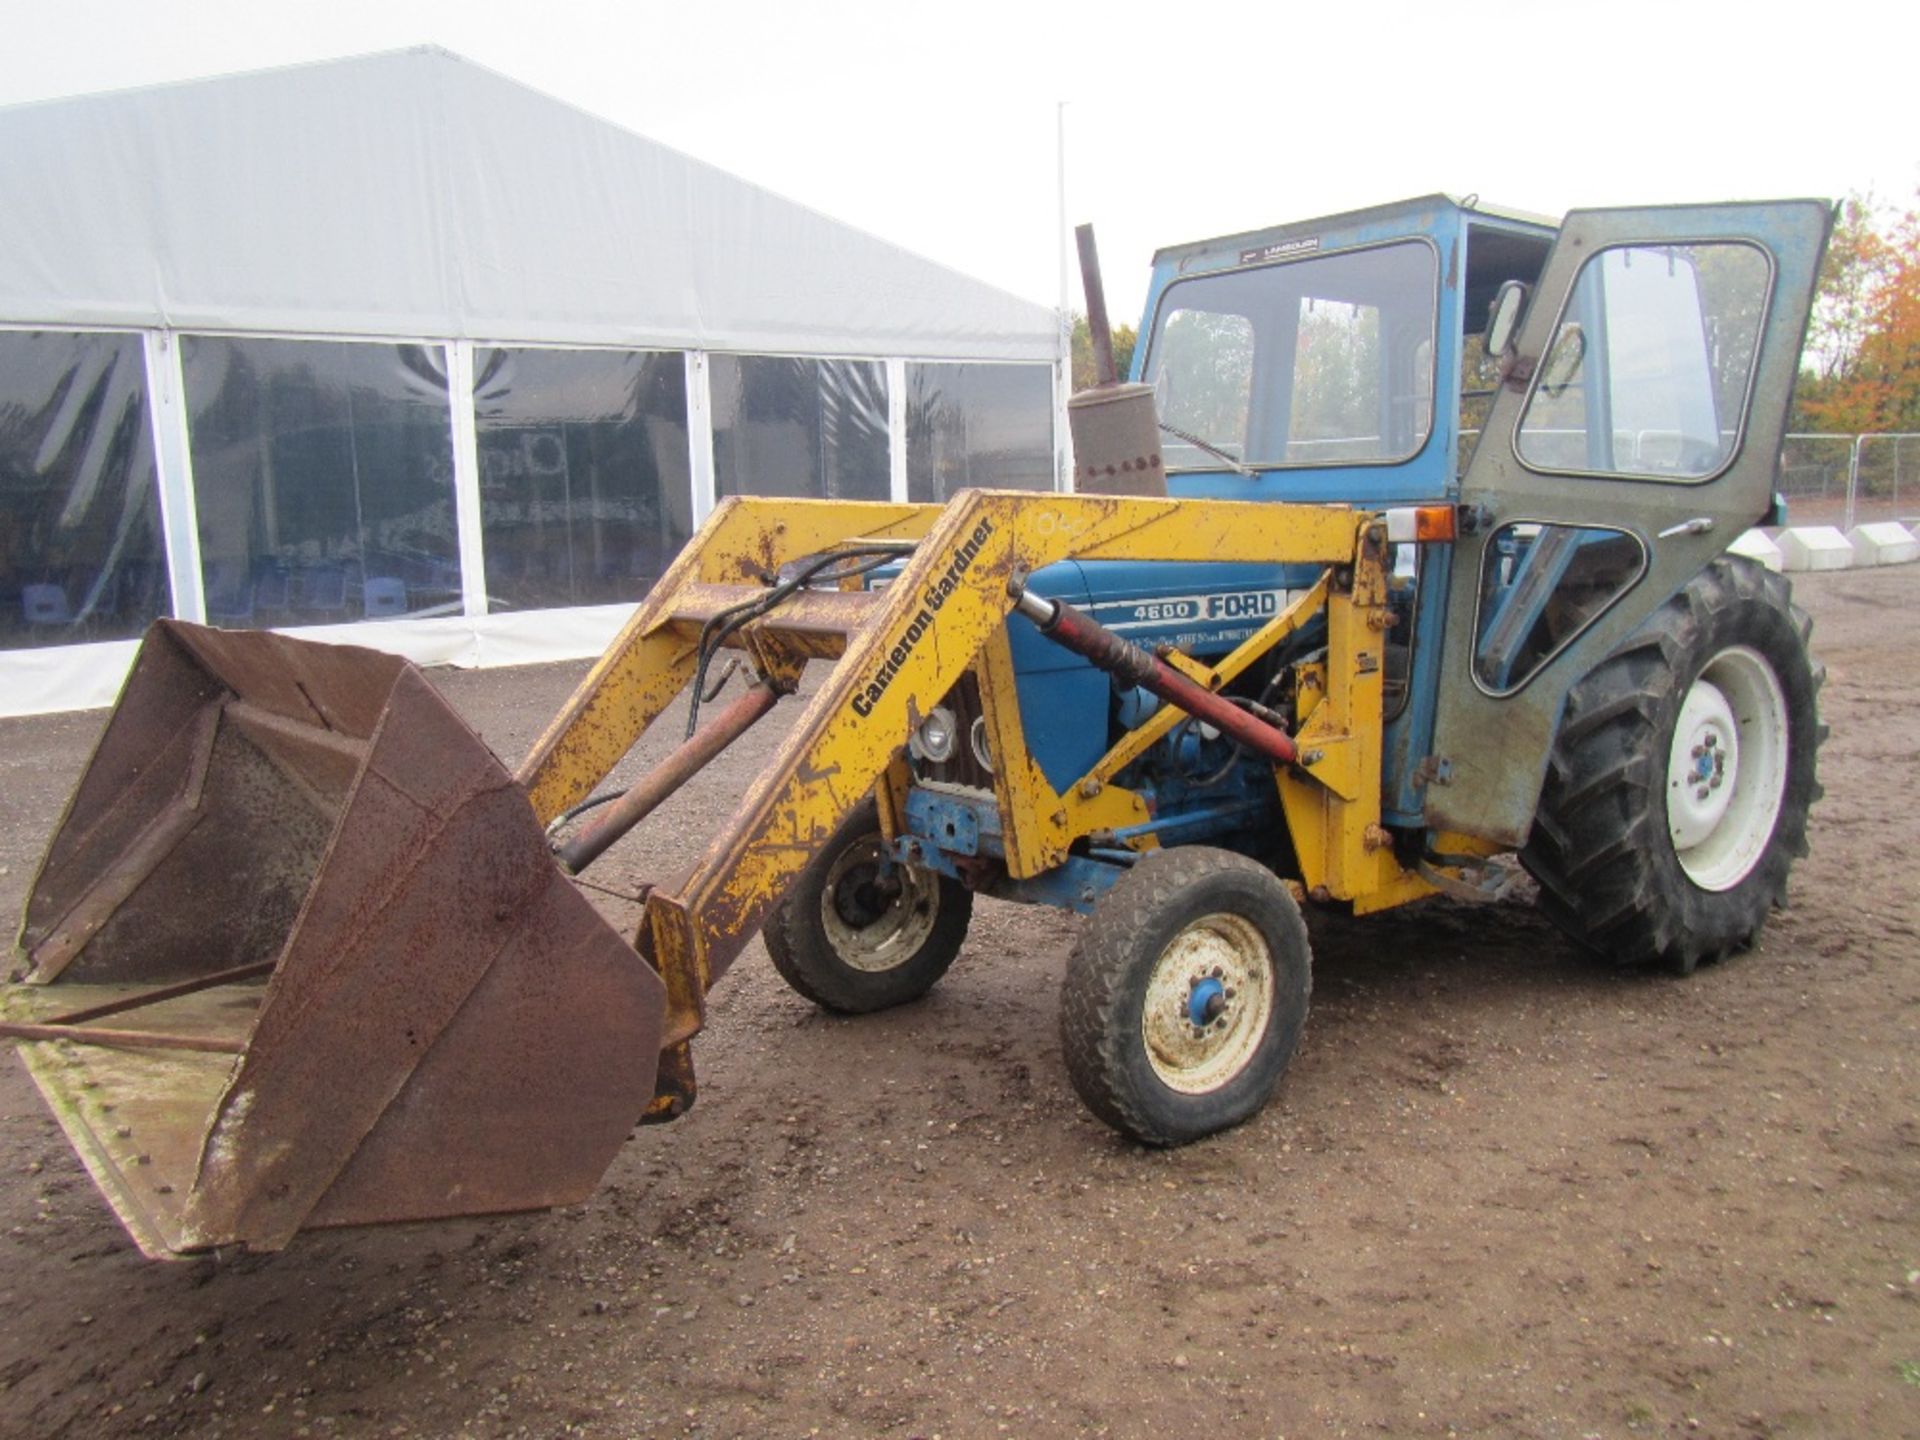 1979 Ford 4600 Tractor. Loader, Power Steering, Bucket, 14.9R28 Tyres. 2887 hrs. Ser No B999392